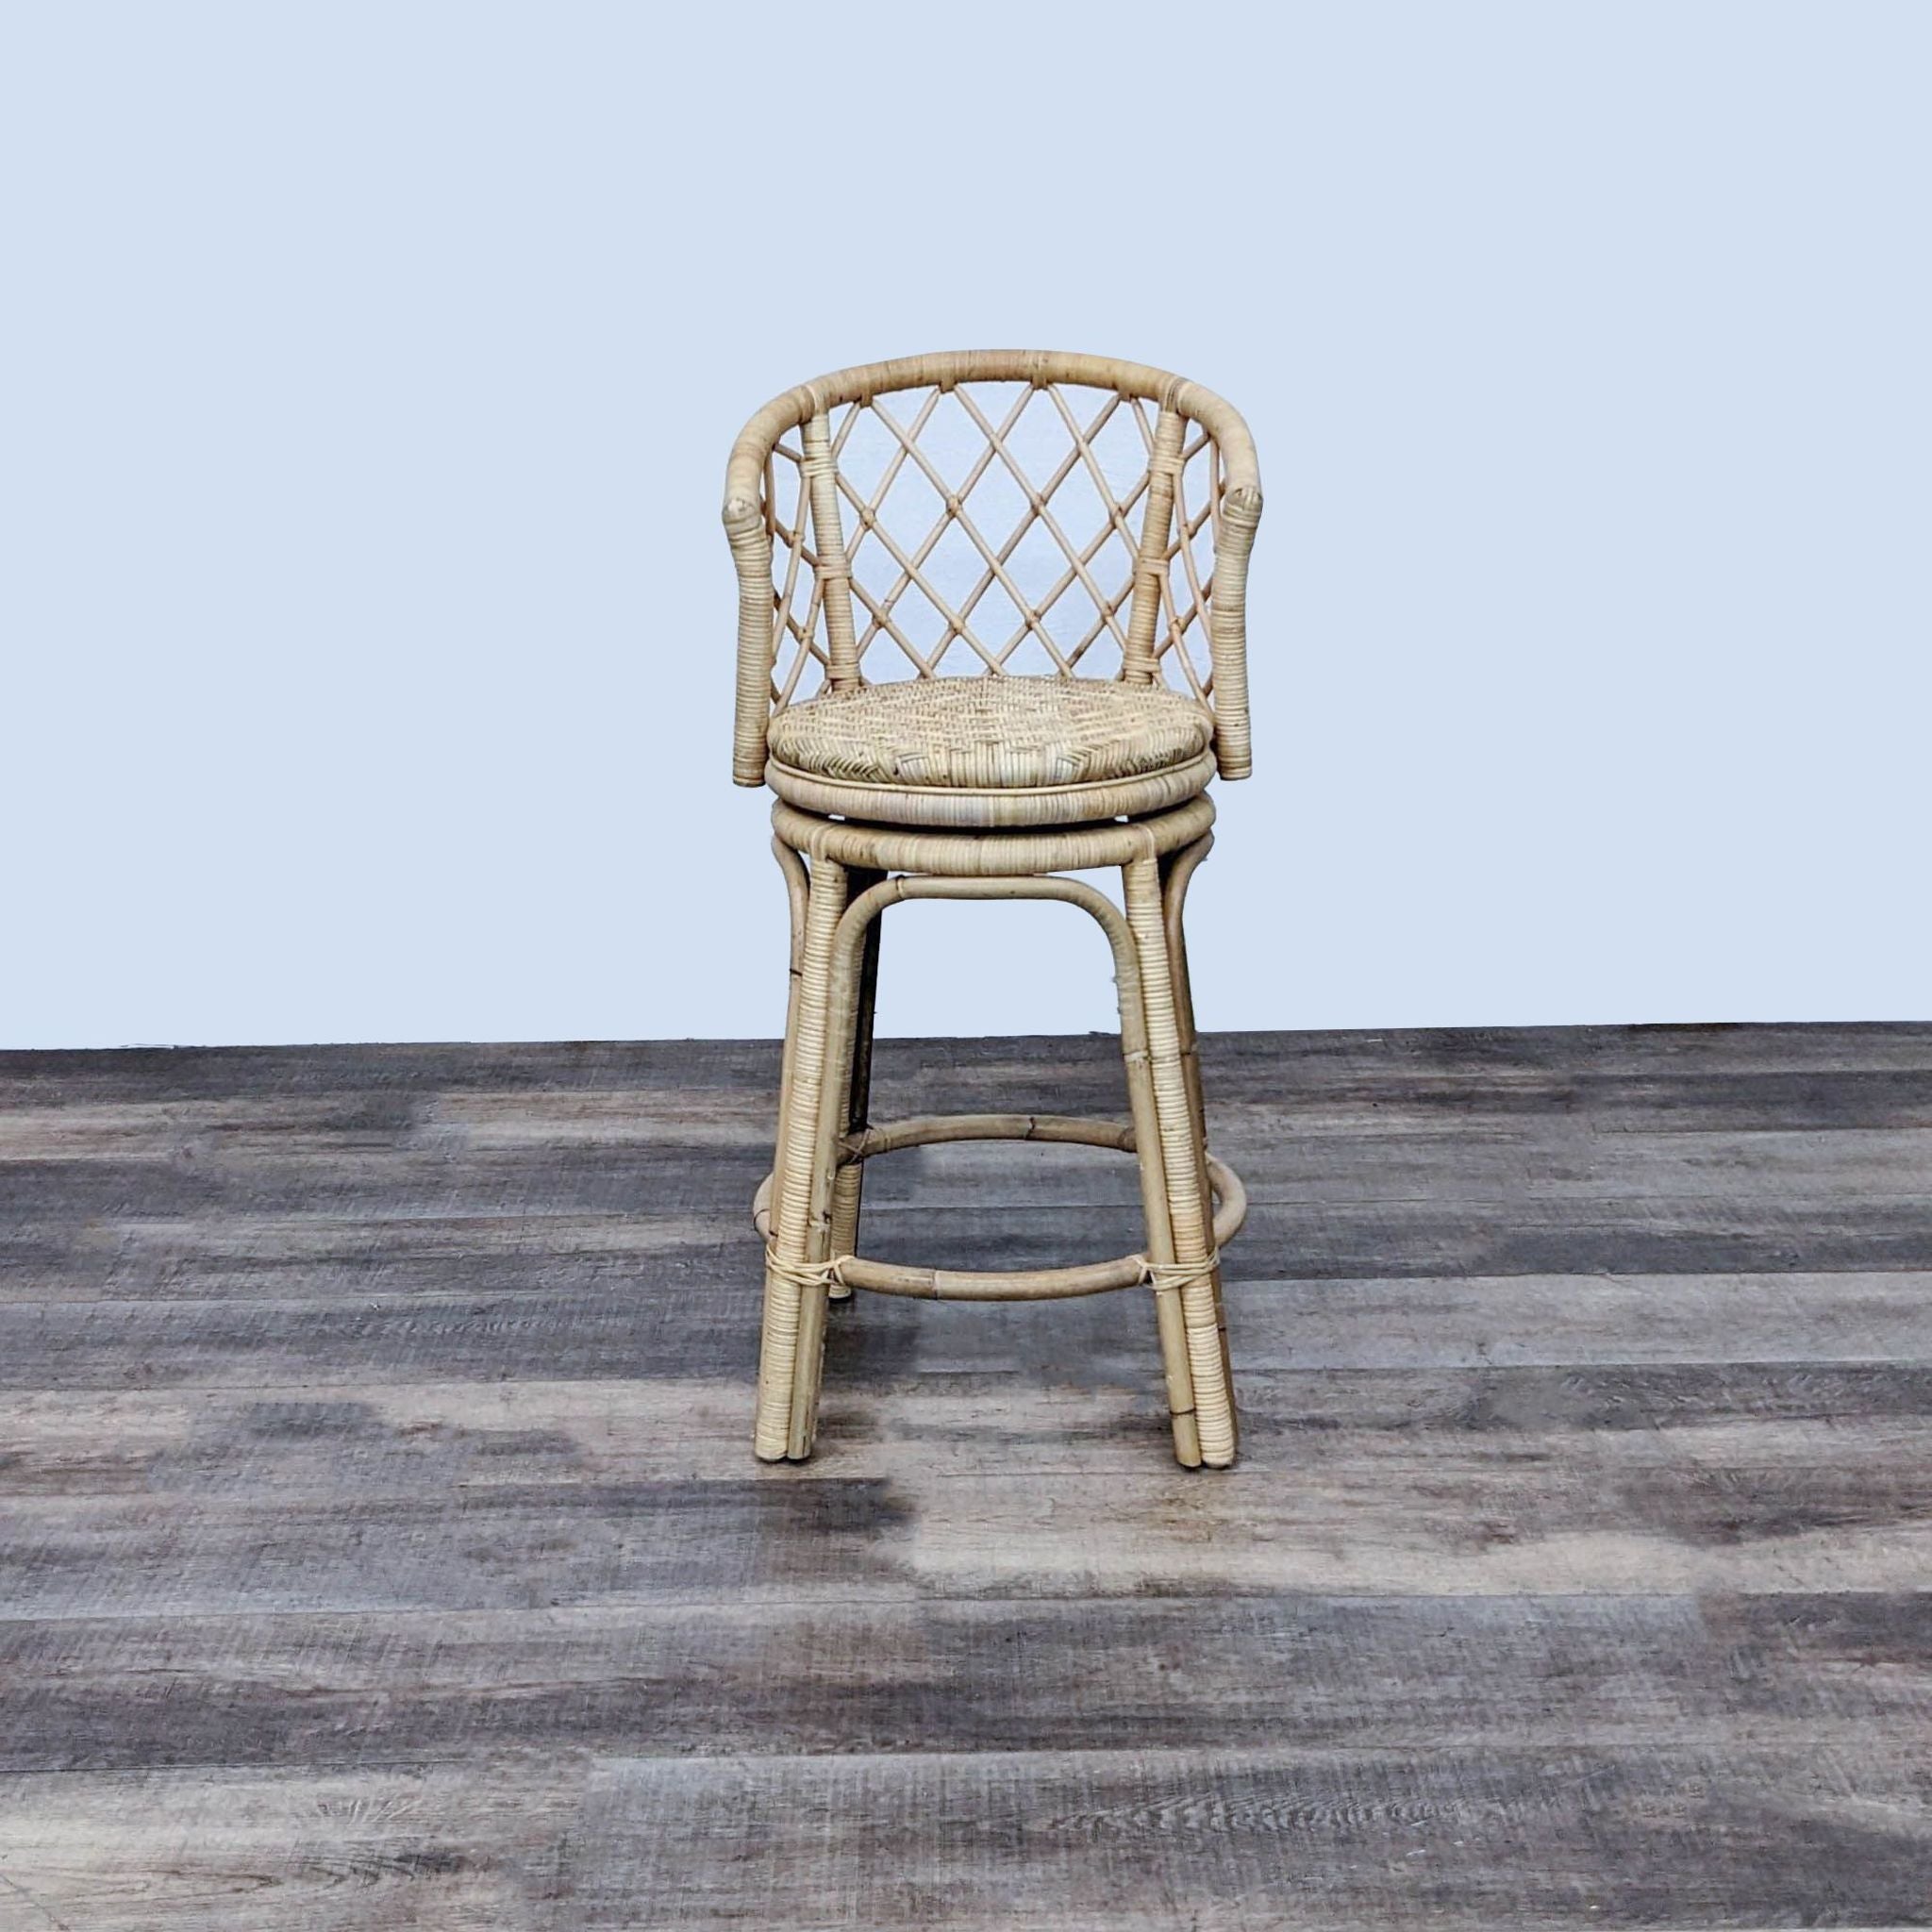 Serena and Lily Avalon Rattan Swivel Stool with open weave back on wooden floor.